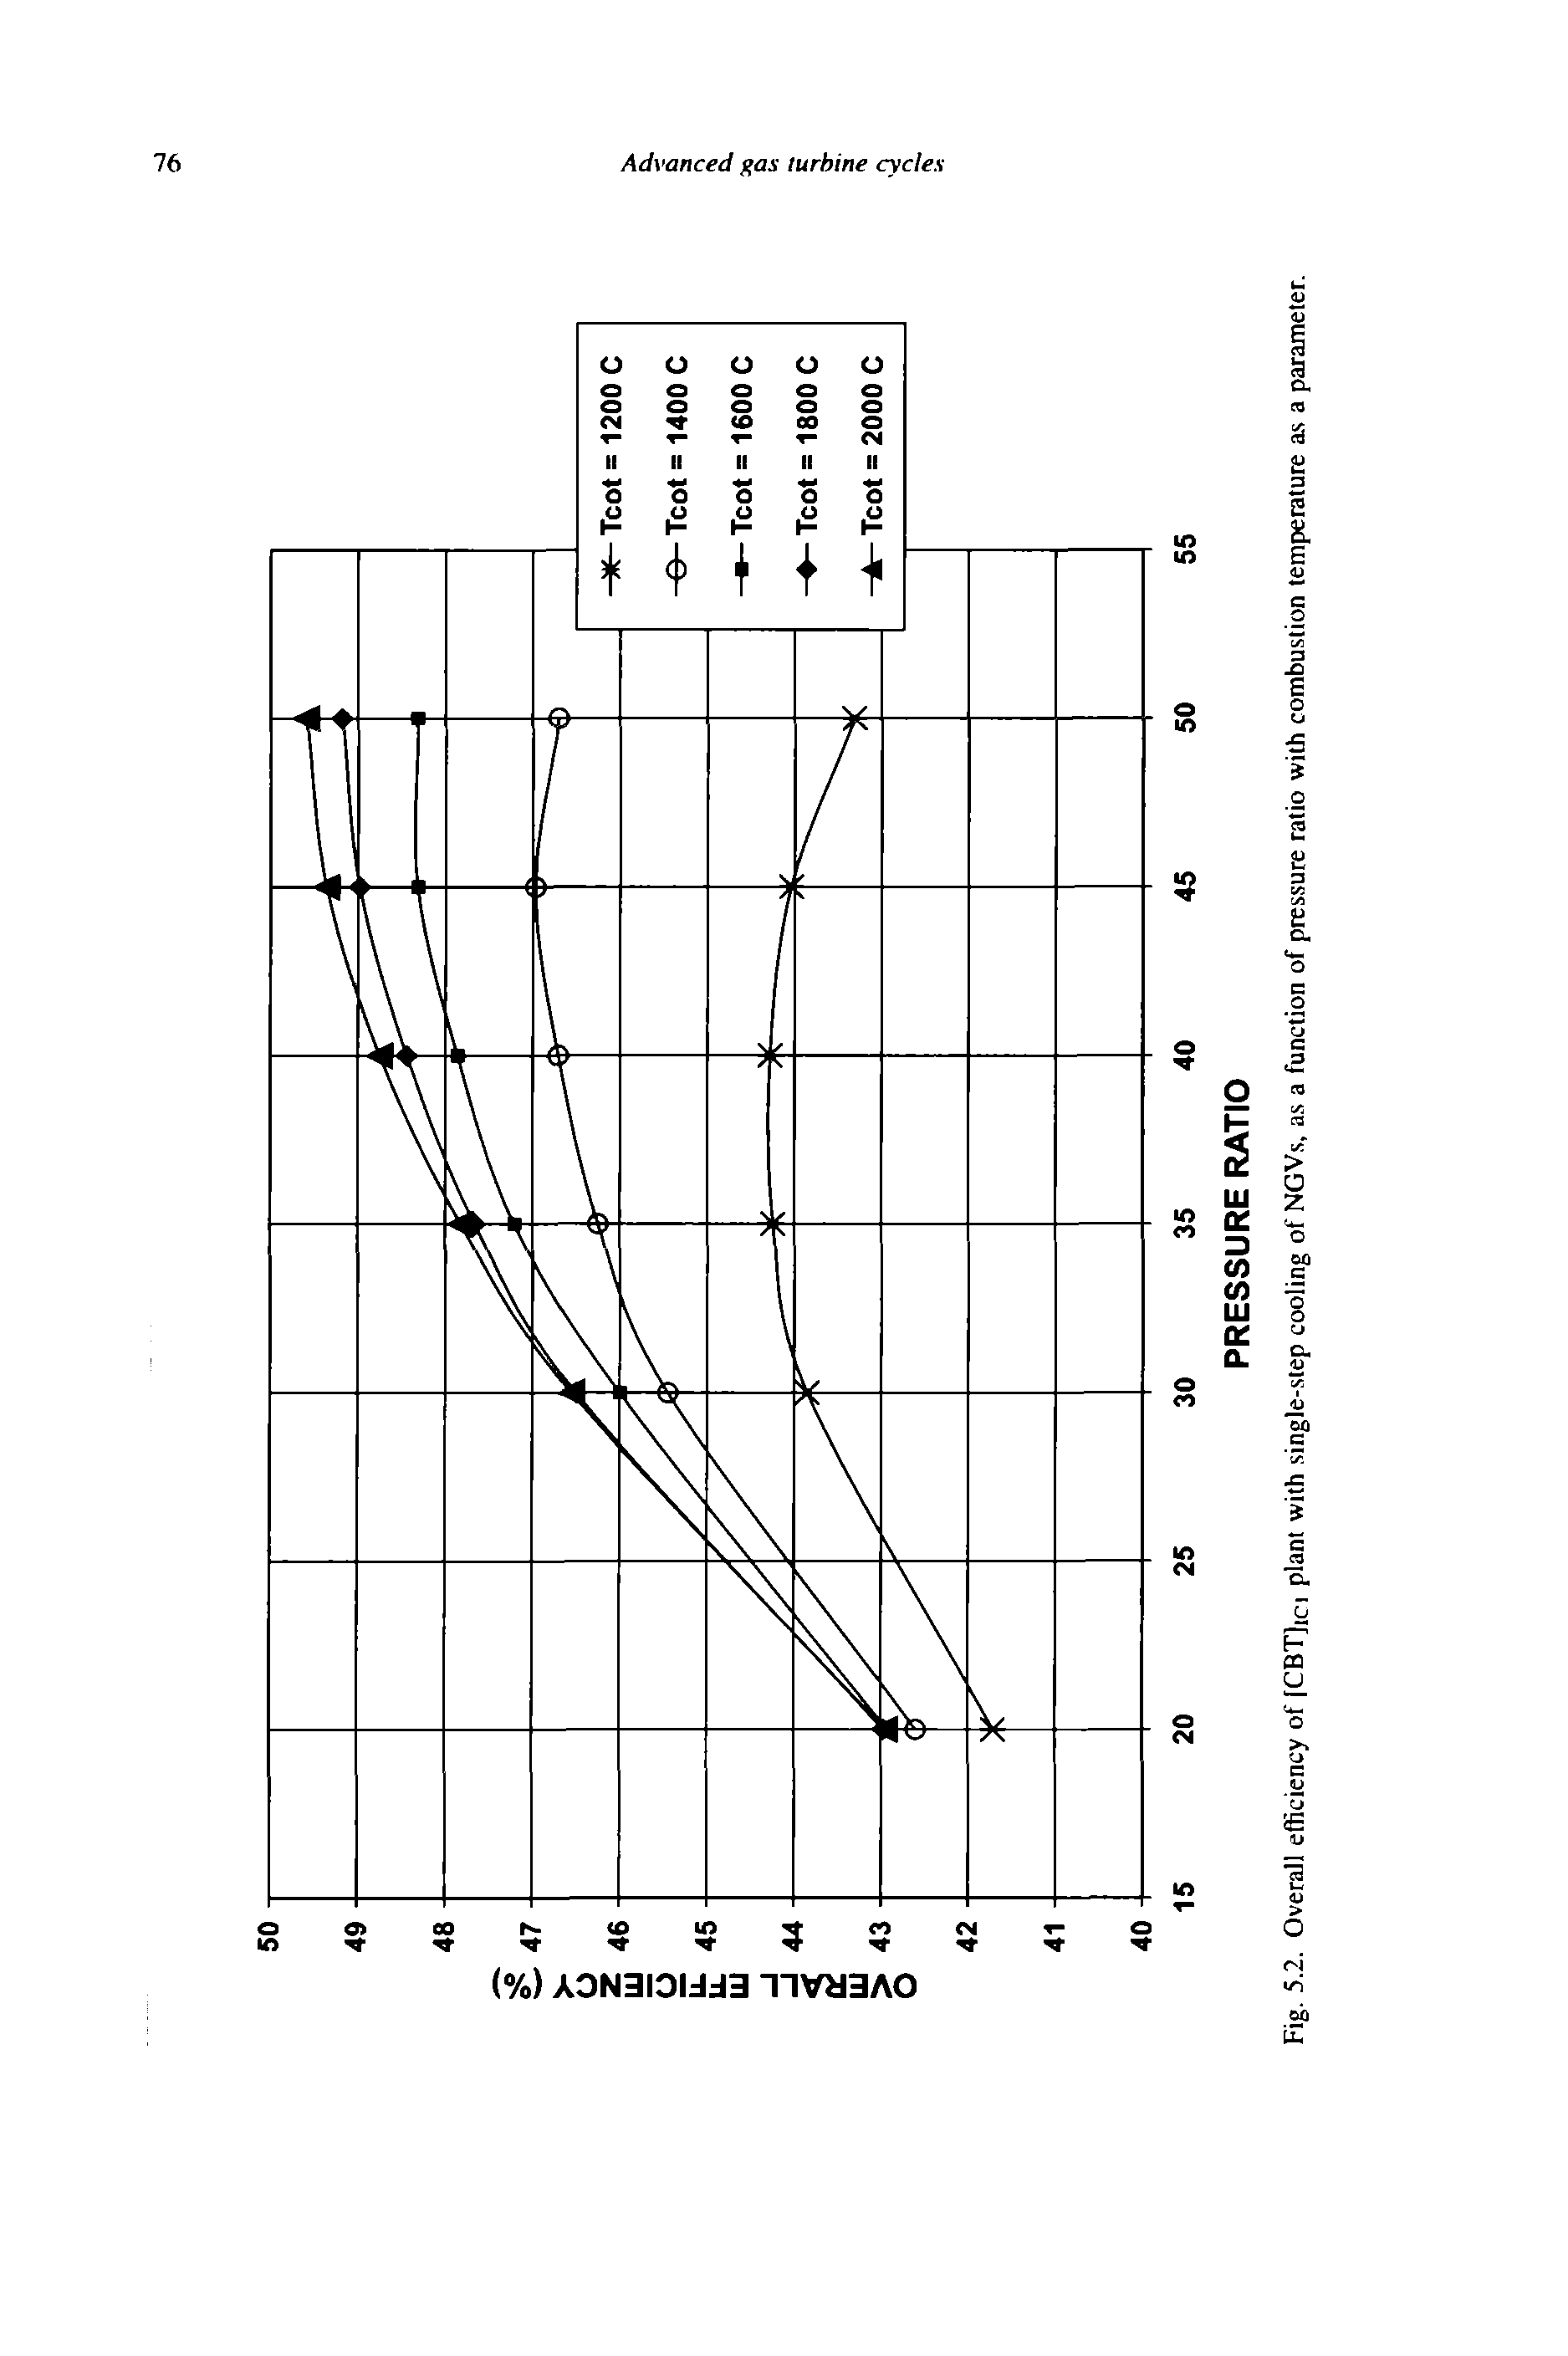 Fig. 5.2. Overall efficiency of fCBT]ici plant with single-step cooling of NGVs, as a function of pressure ratio with combustion temperature as a parameter.